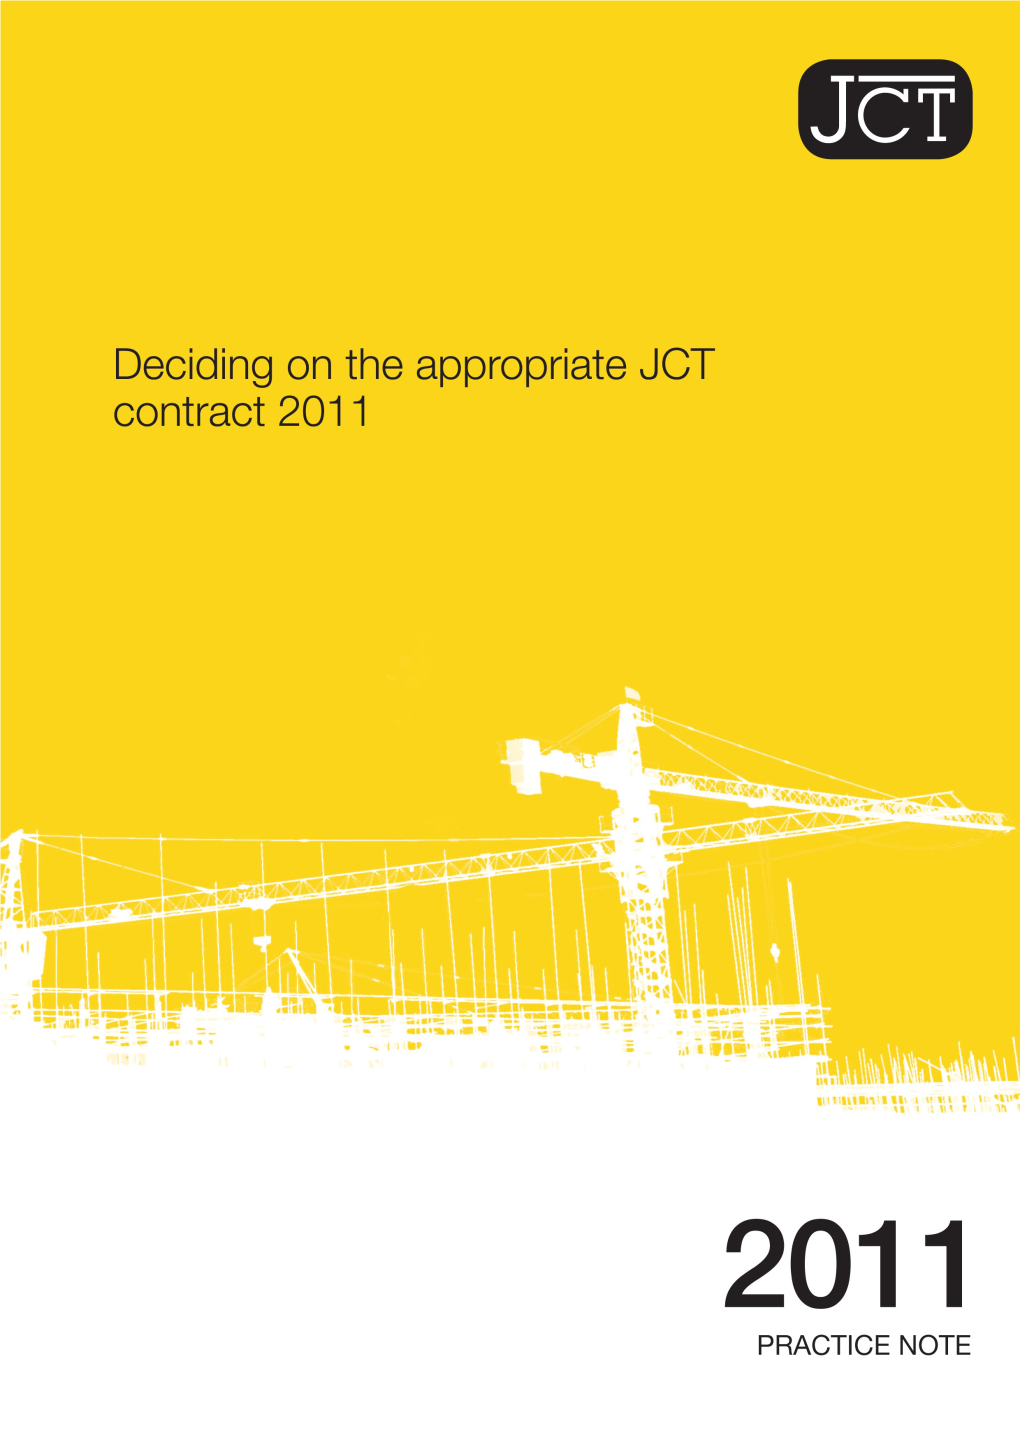 Practice Note – Deciding on the Appropriate JCT Contract